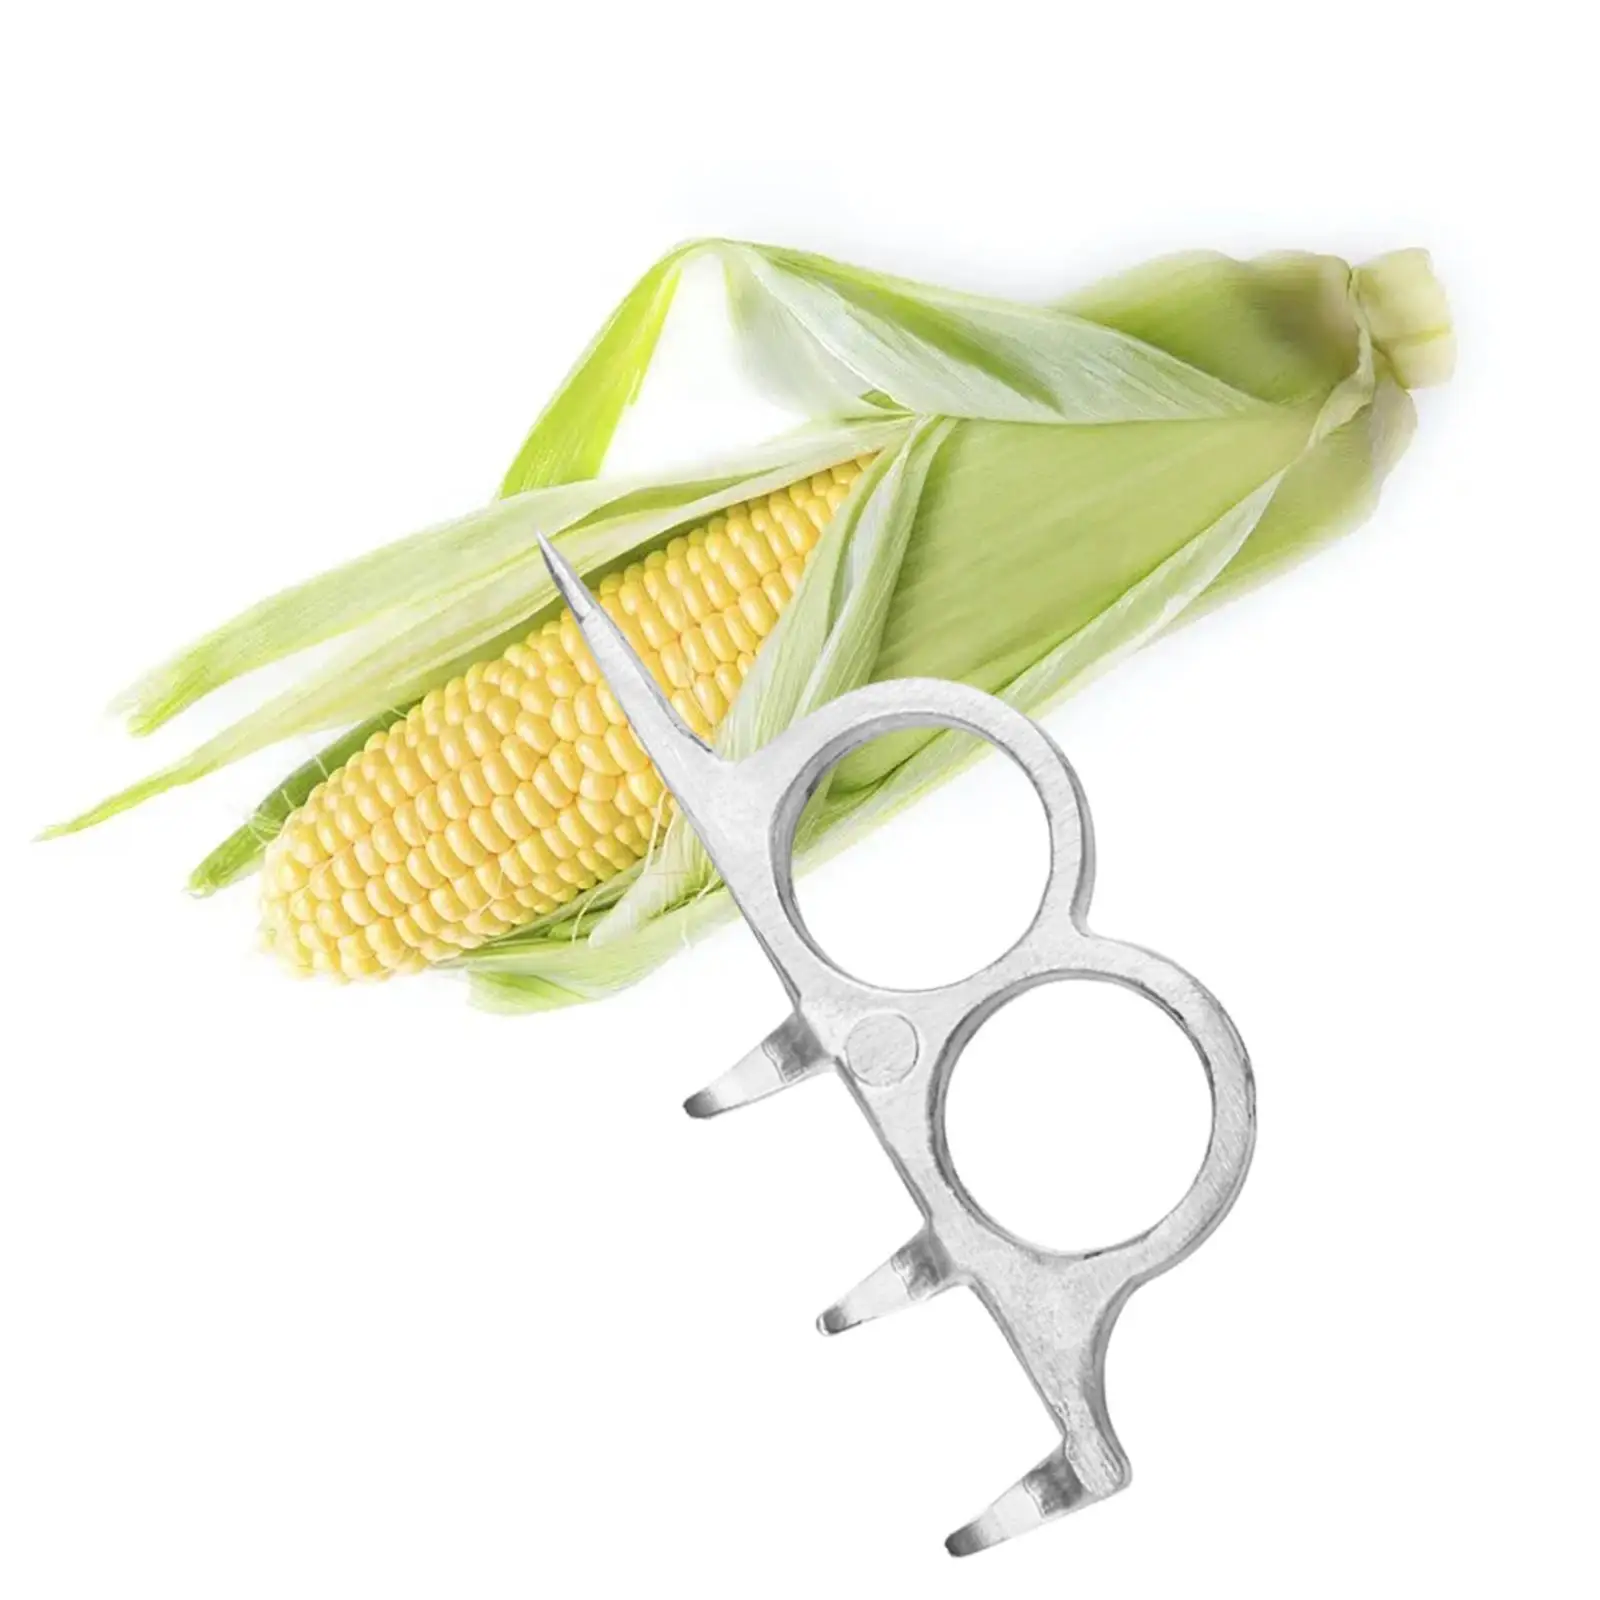 Coin Remover Tool Practical Quick Peeling Quick Corn Peeling Cutter for Groceries Chefs Cooking Kitchen Gadget Agricultural